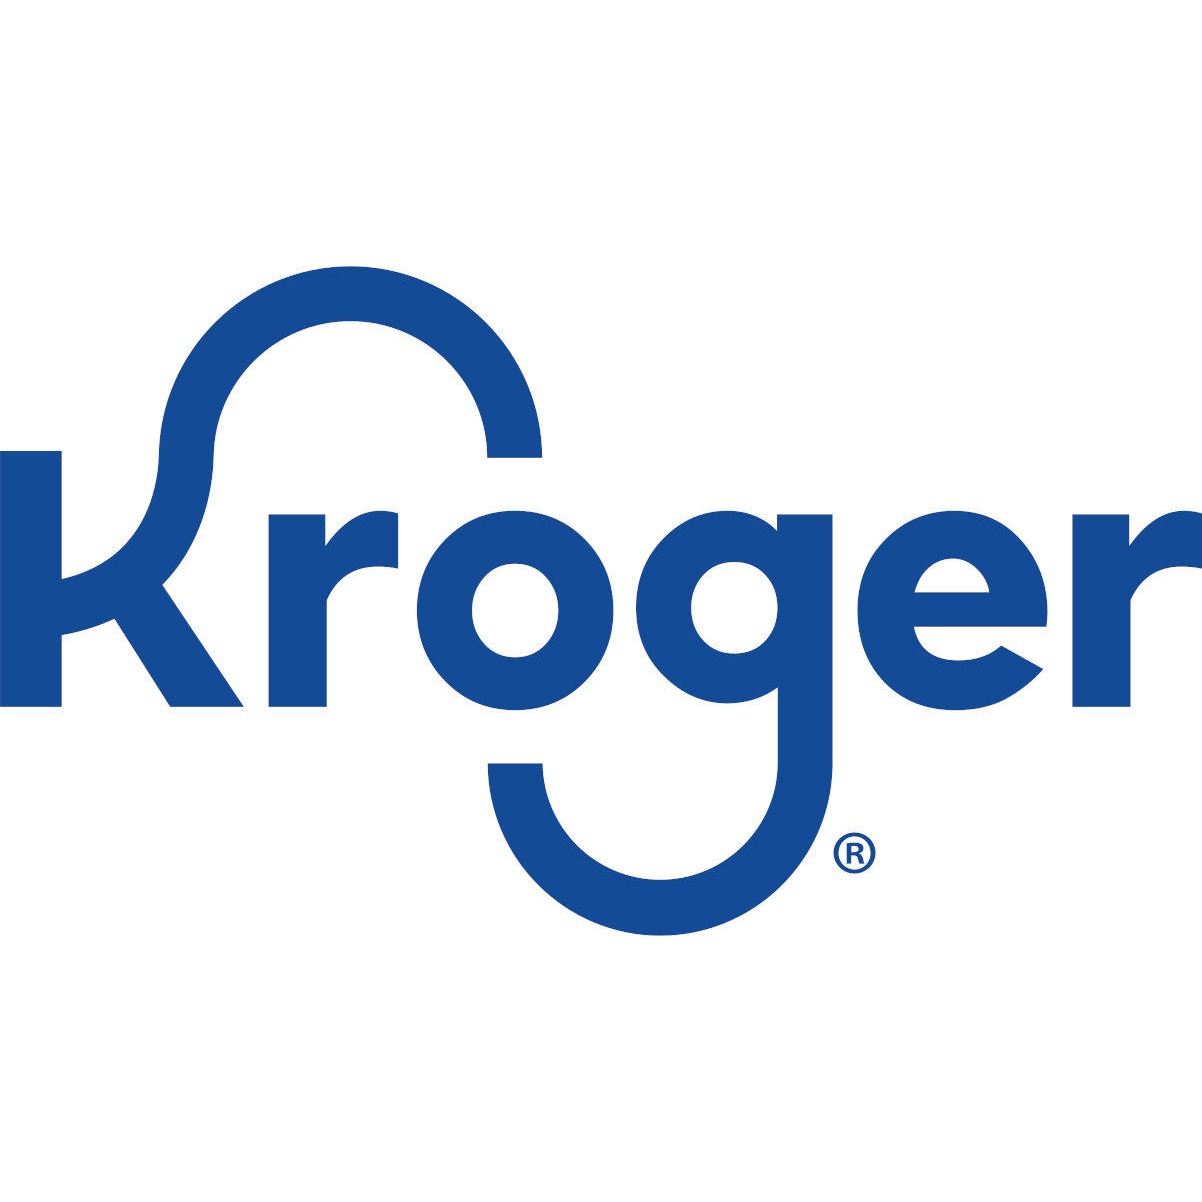 Kroger Grocery Delivery and Pickup Photo